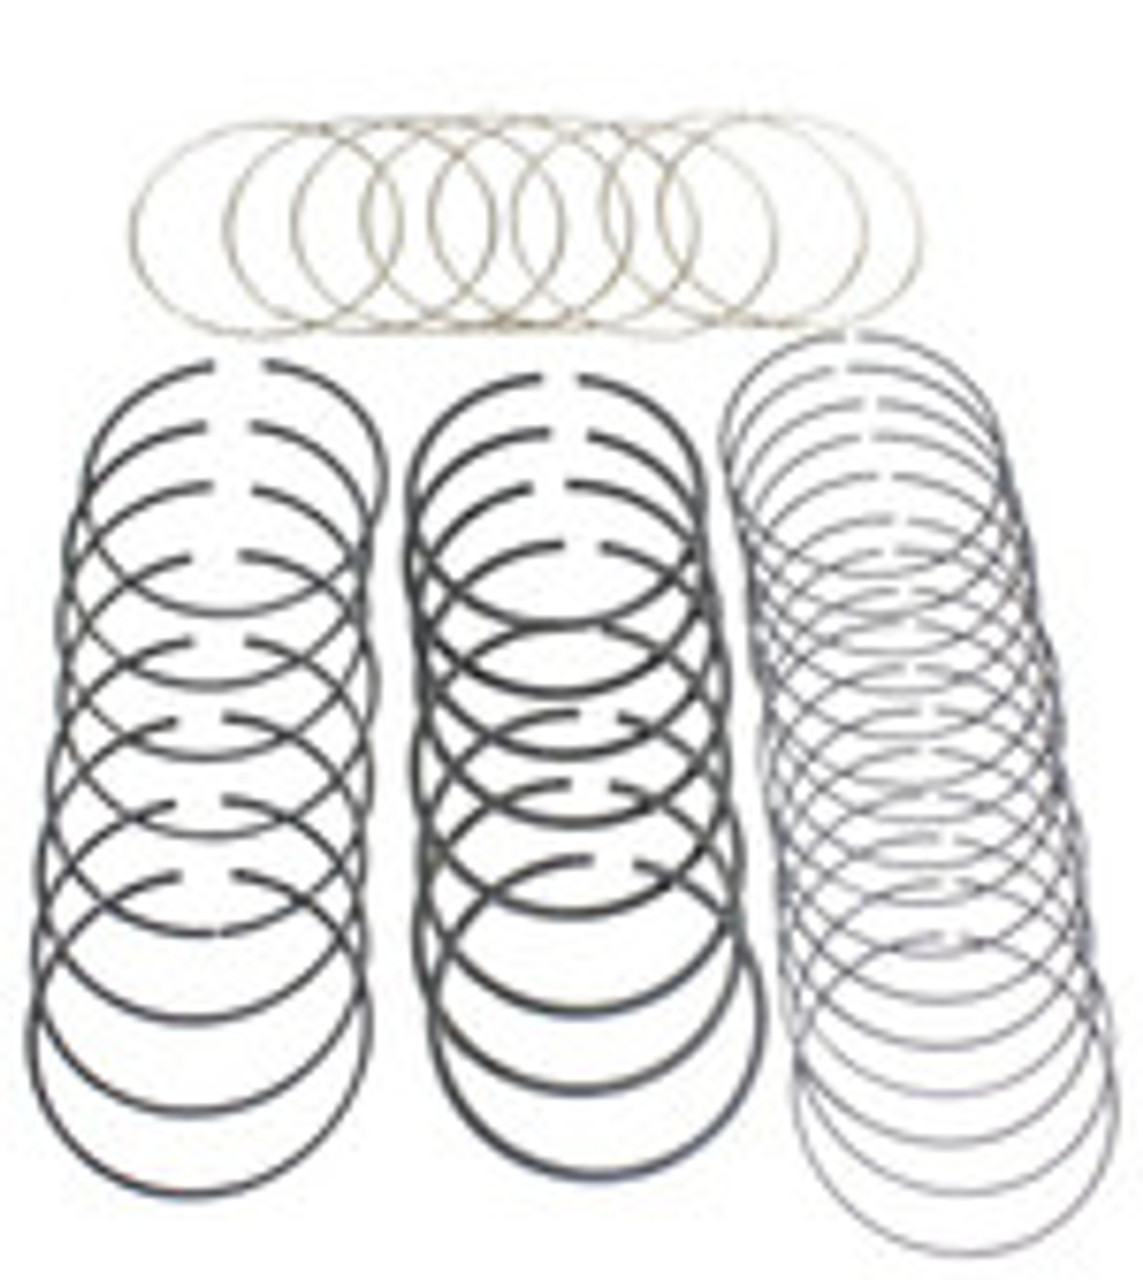 Piston Ring Set - 2010 Ford Expedition 5.4L Engine Parts # PR4150ZE359